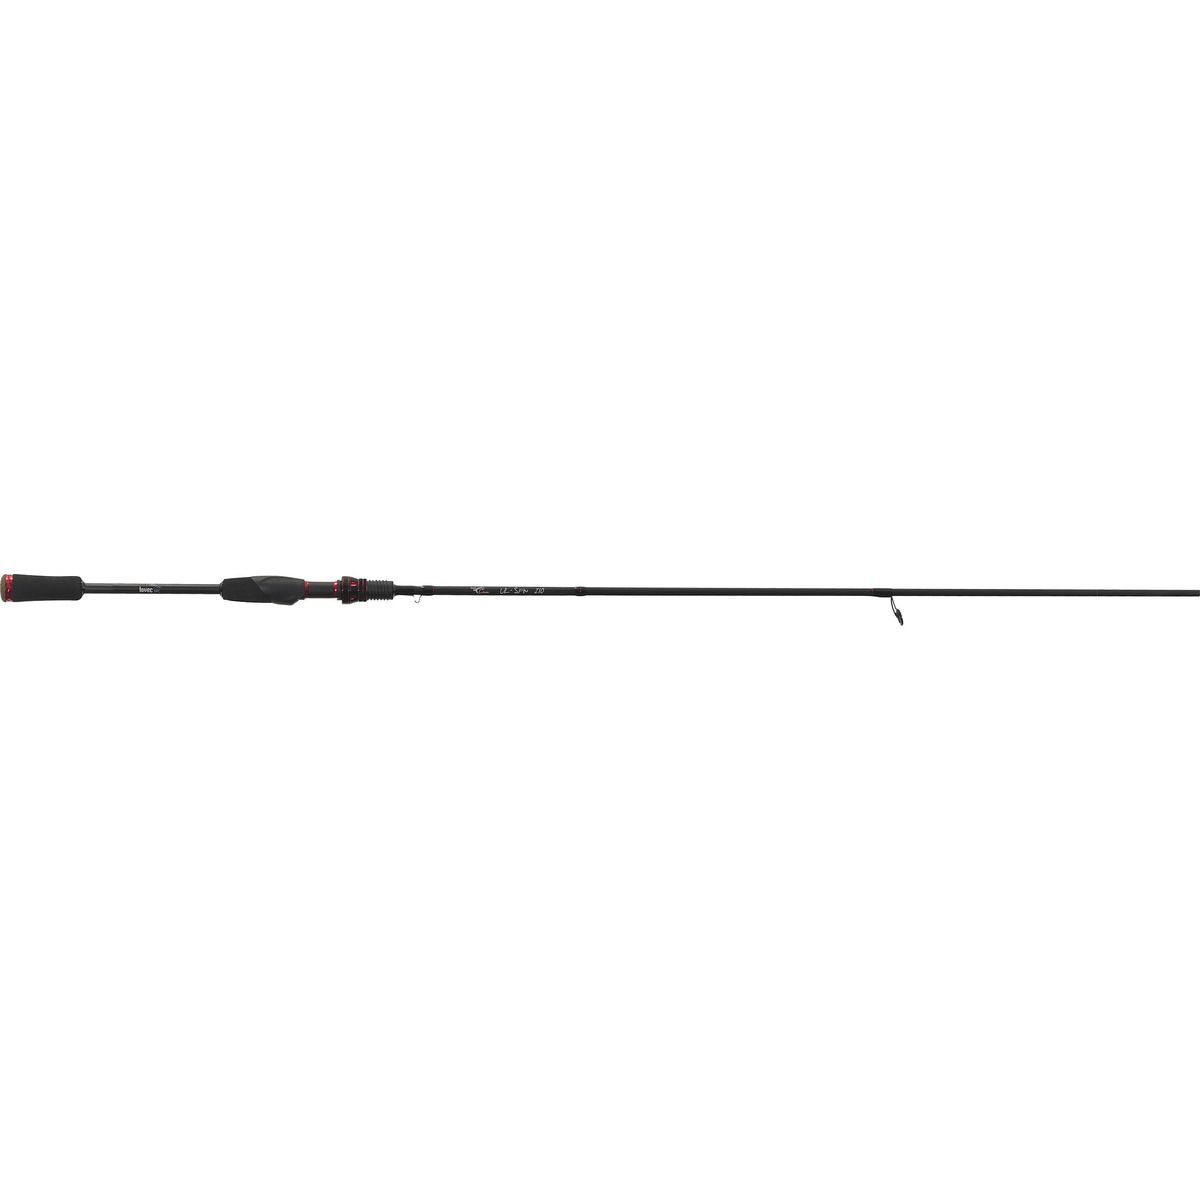 Iron Claw Lovec Rapy S - 240 cm - 3-12 g